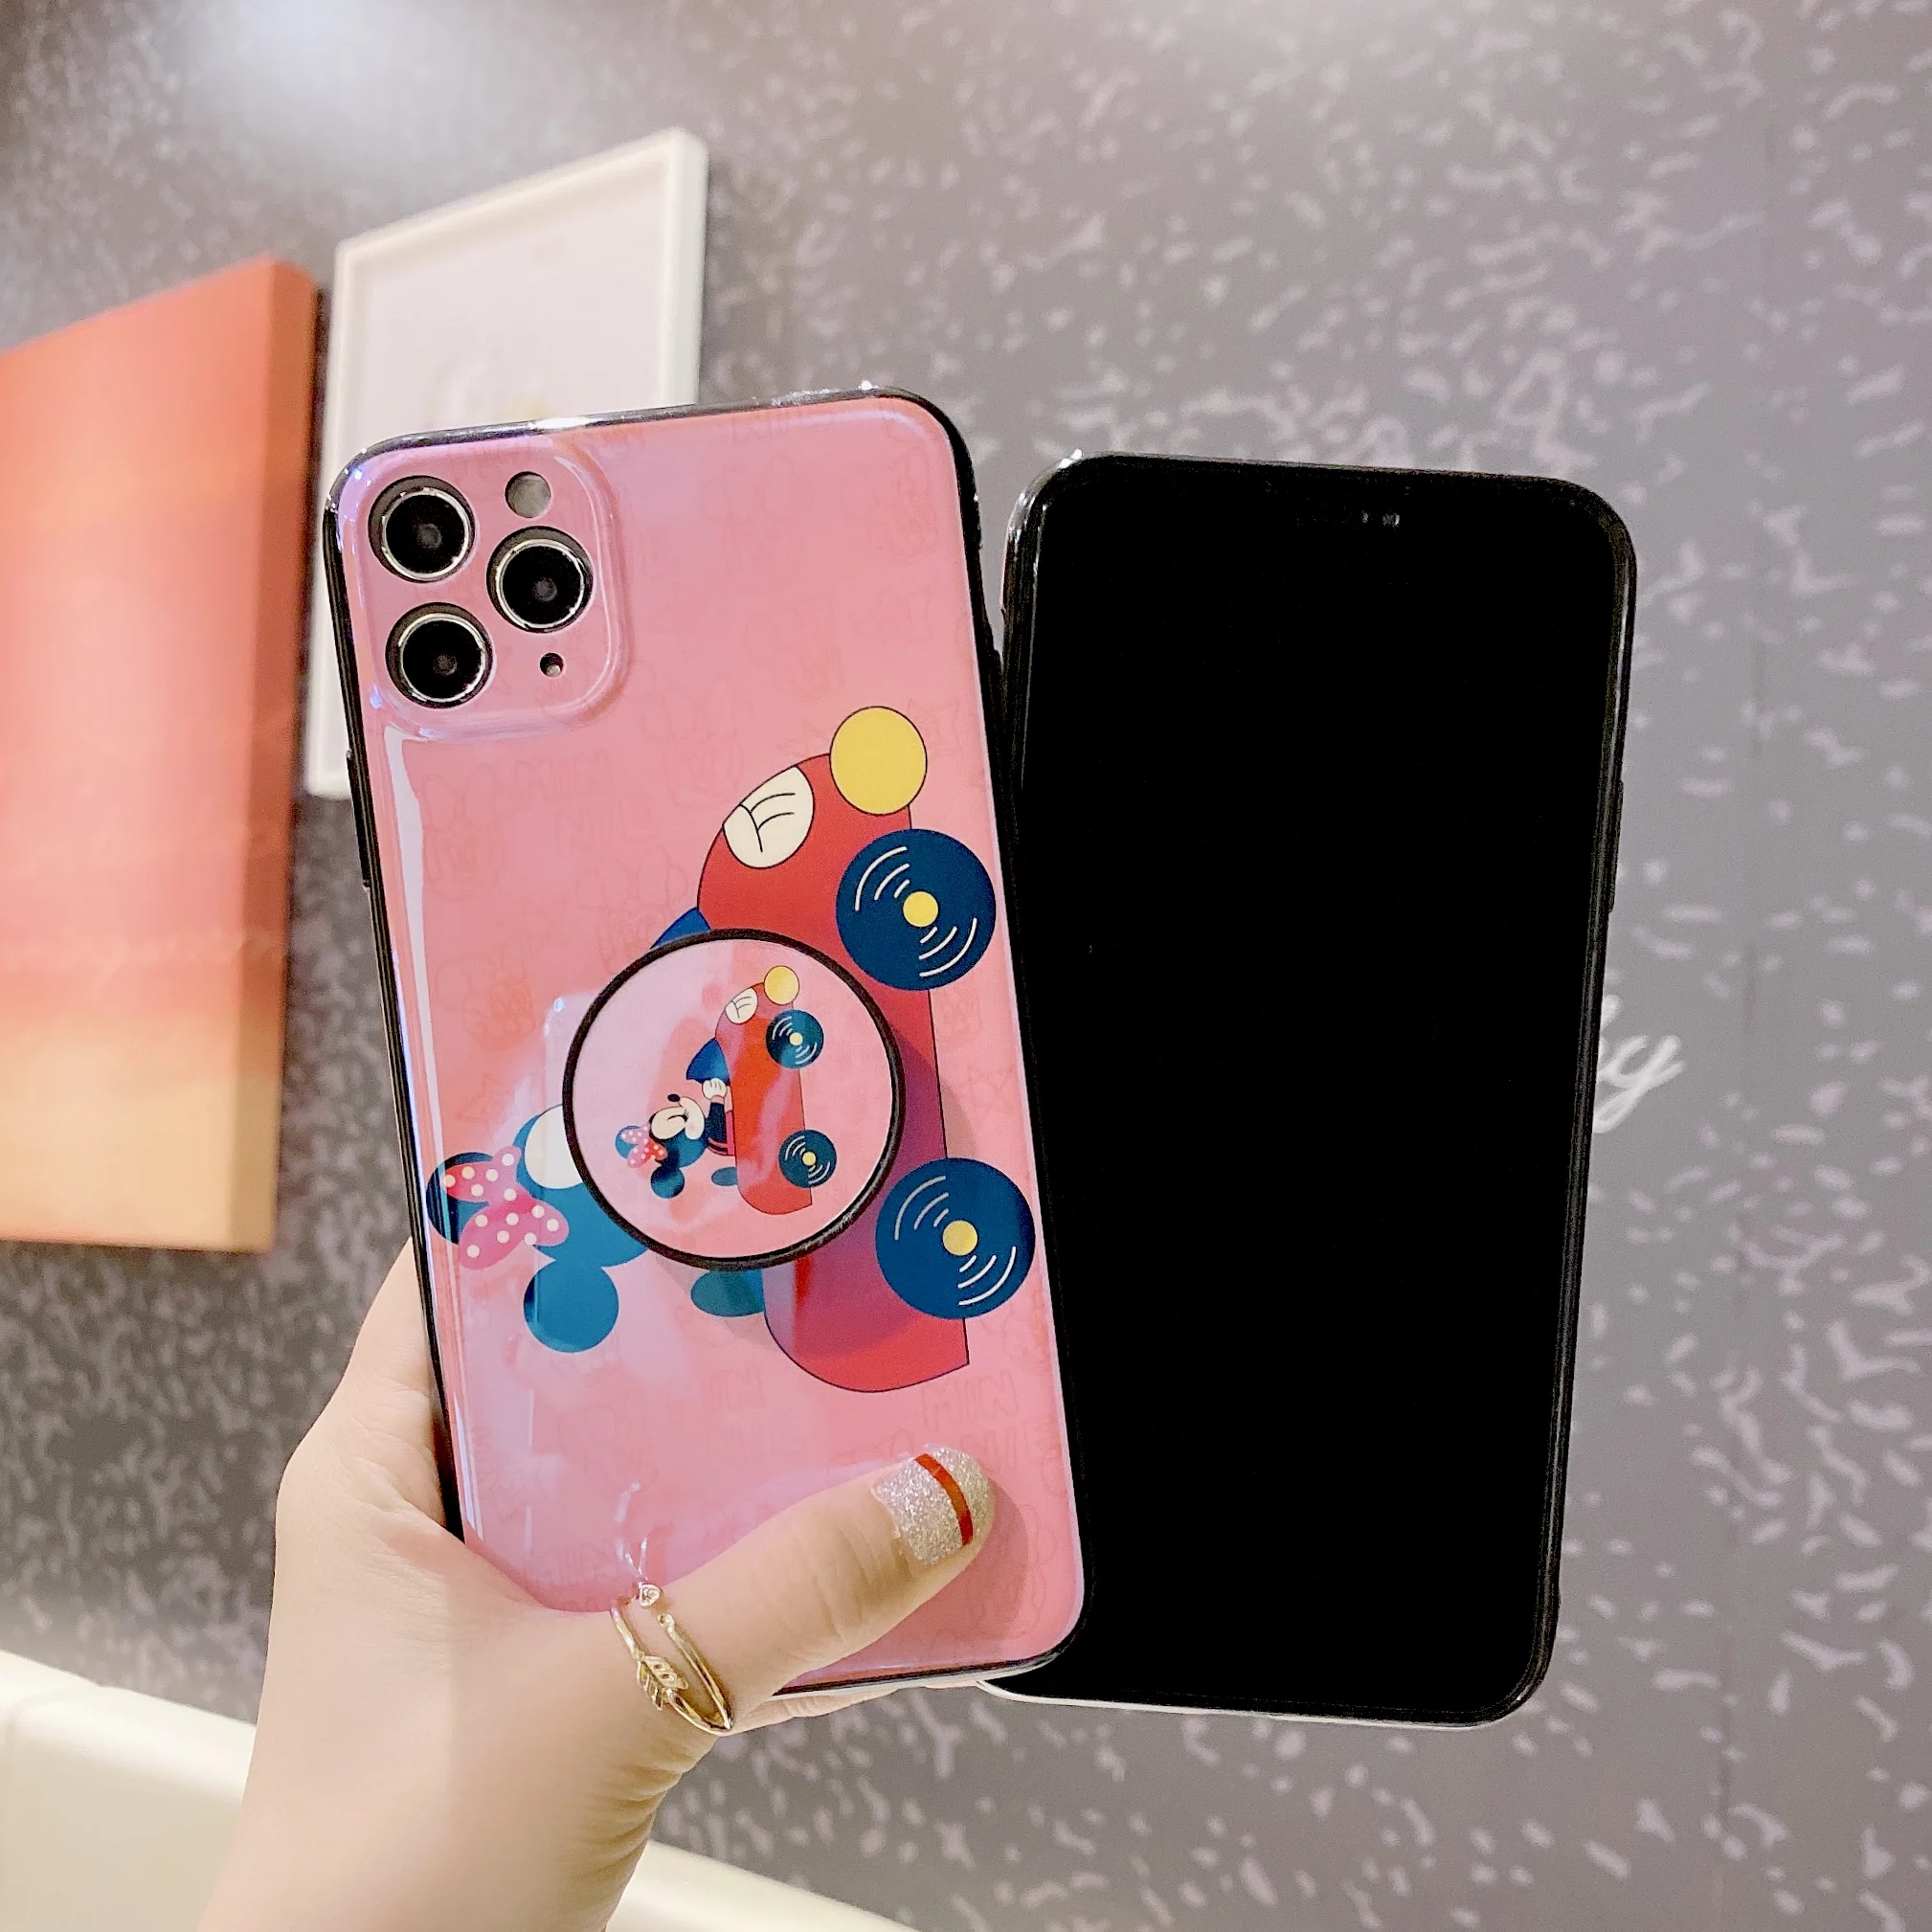 

Blue Ray Anime Phone Case for Redmi 9A 9C 9T 8A 7A 6A 6 Pro 5 Plus K20 K30 Note 4X 8T 9S Phone Case Cartoon Soft Silicone Coque